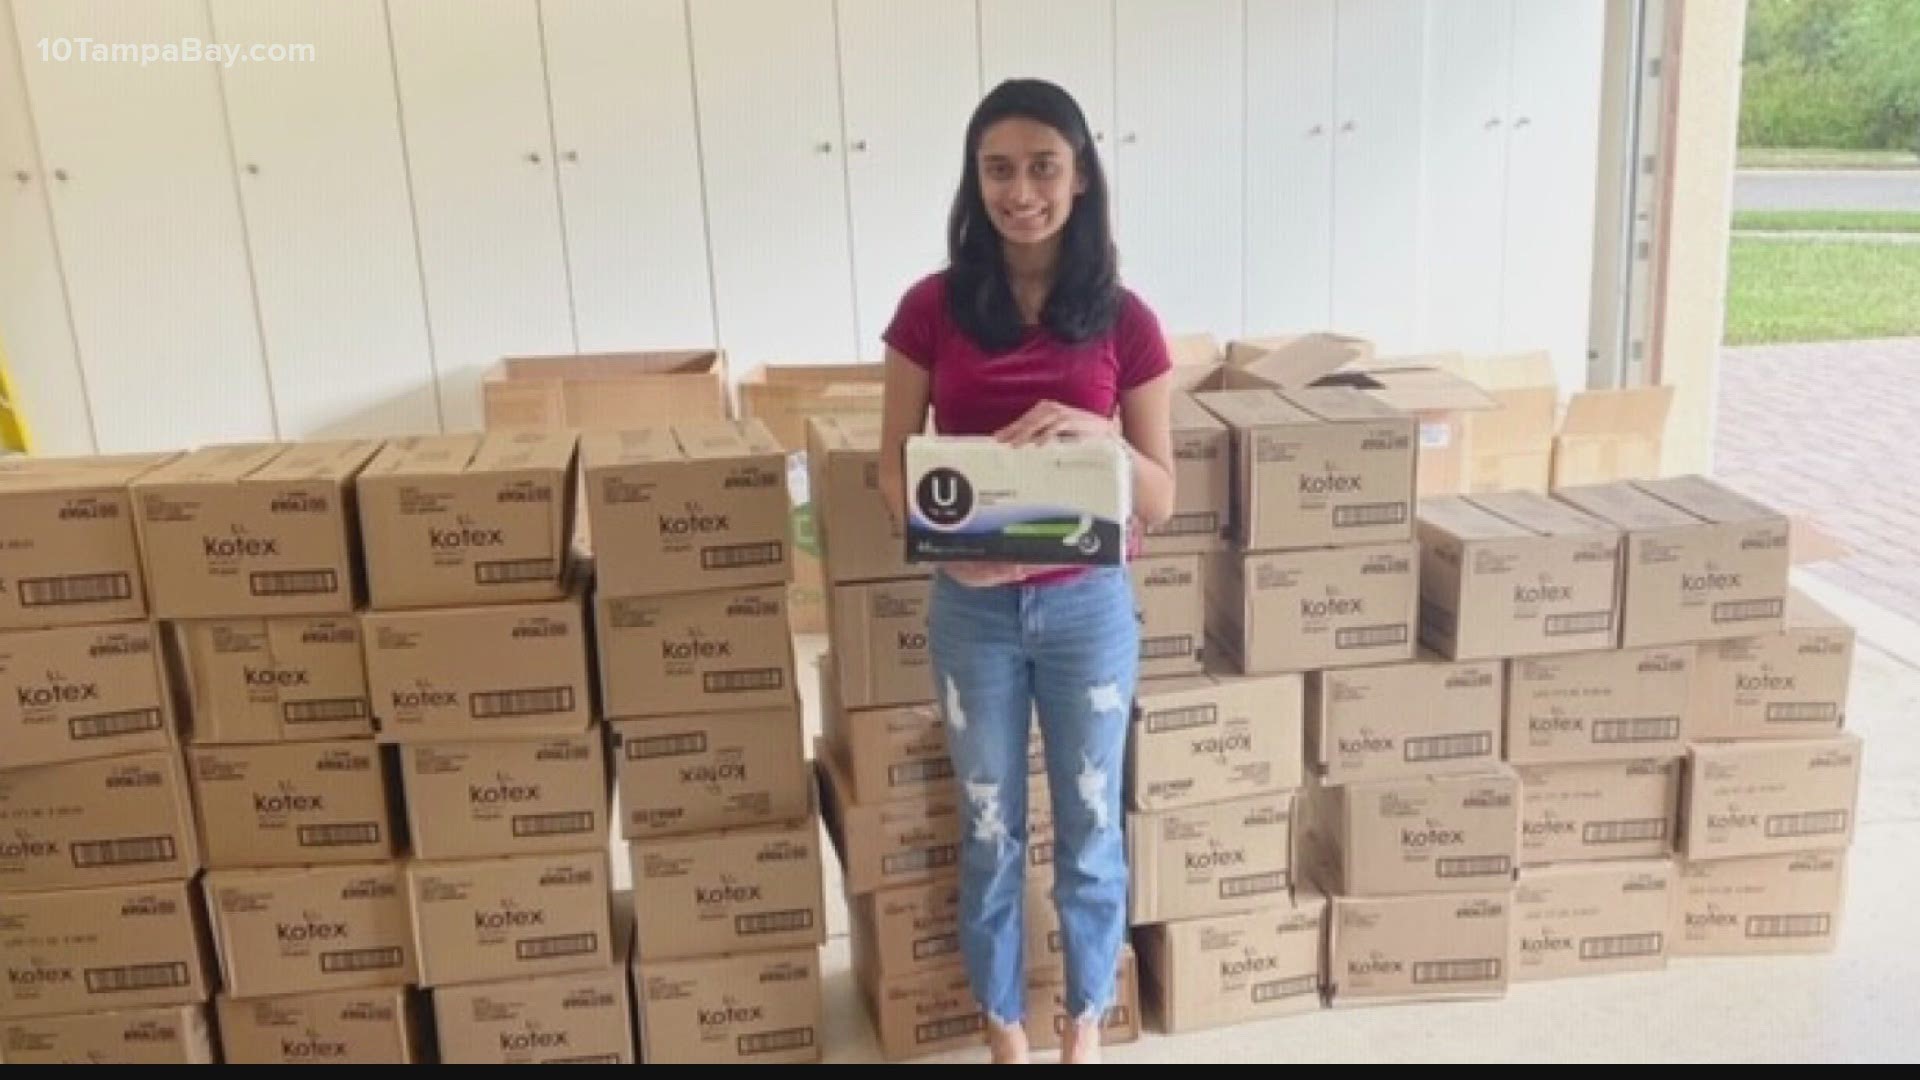 Aanya Patel, 15, was shocked to find out one in five girls struggle to afford the basic necessities of menstrual hygiene products.